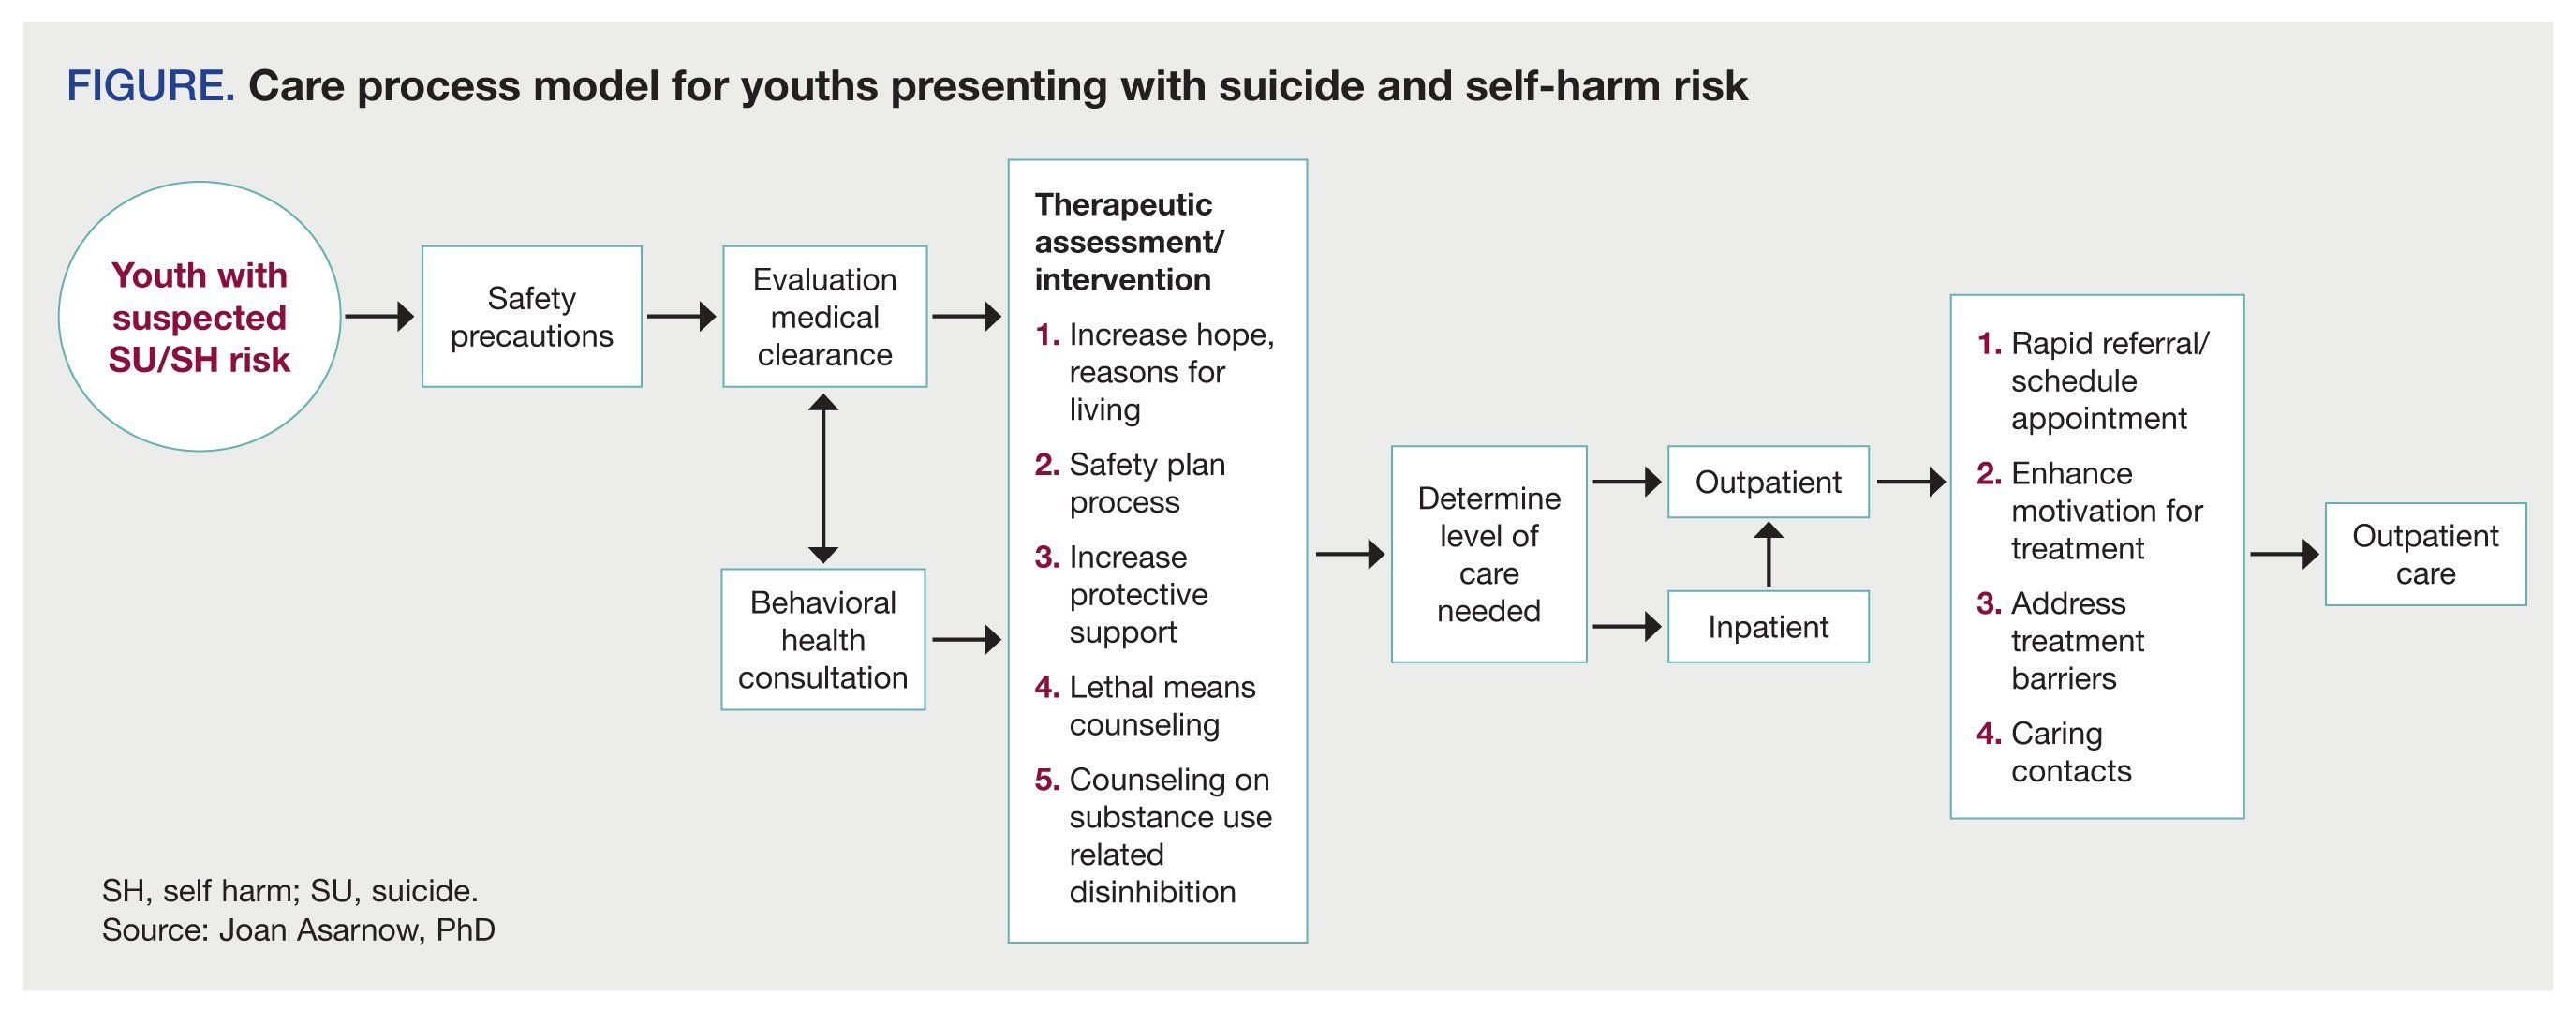 Care process model for youths presenting with suicide and self-harm risk